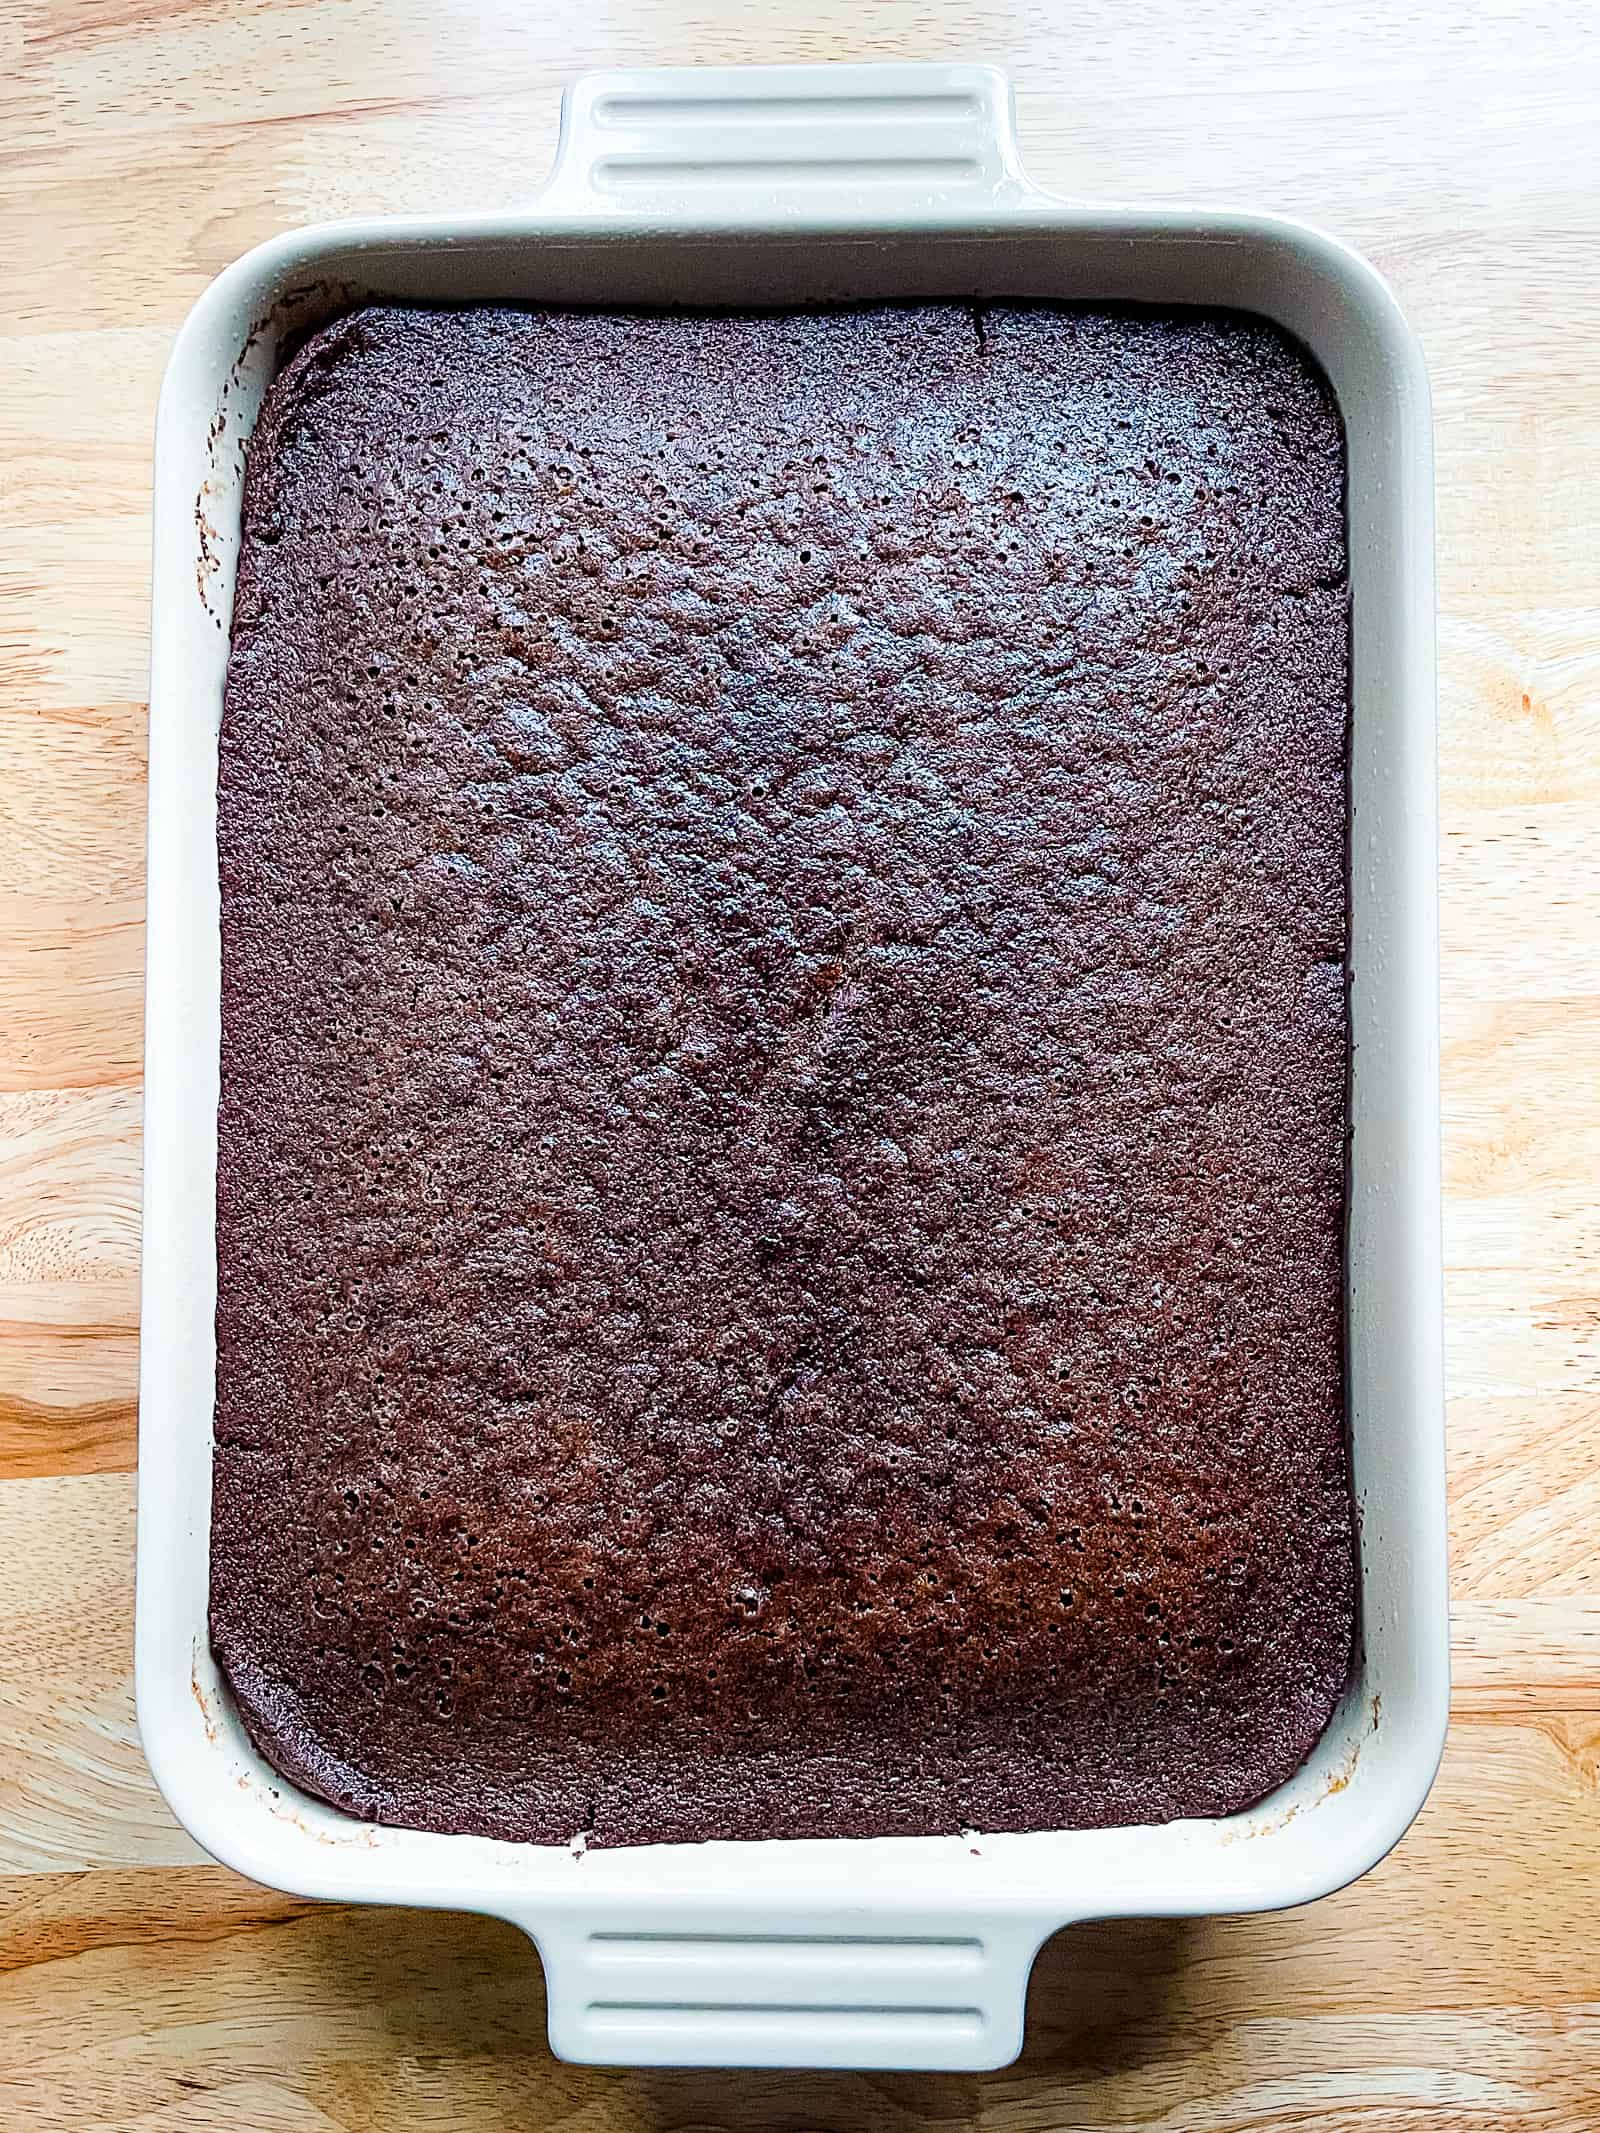 Chocolate crazy cake cooling in a pan. Cake is not frosted. 